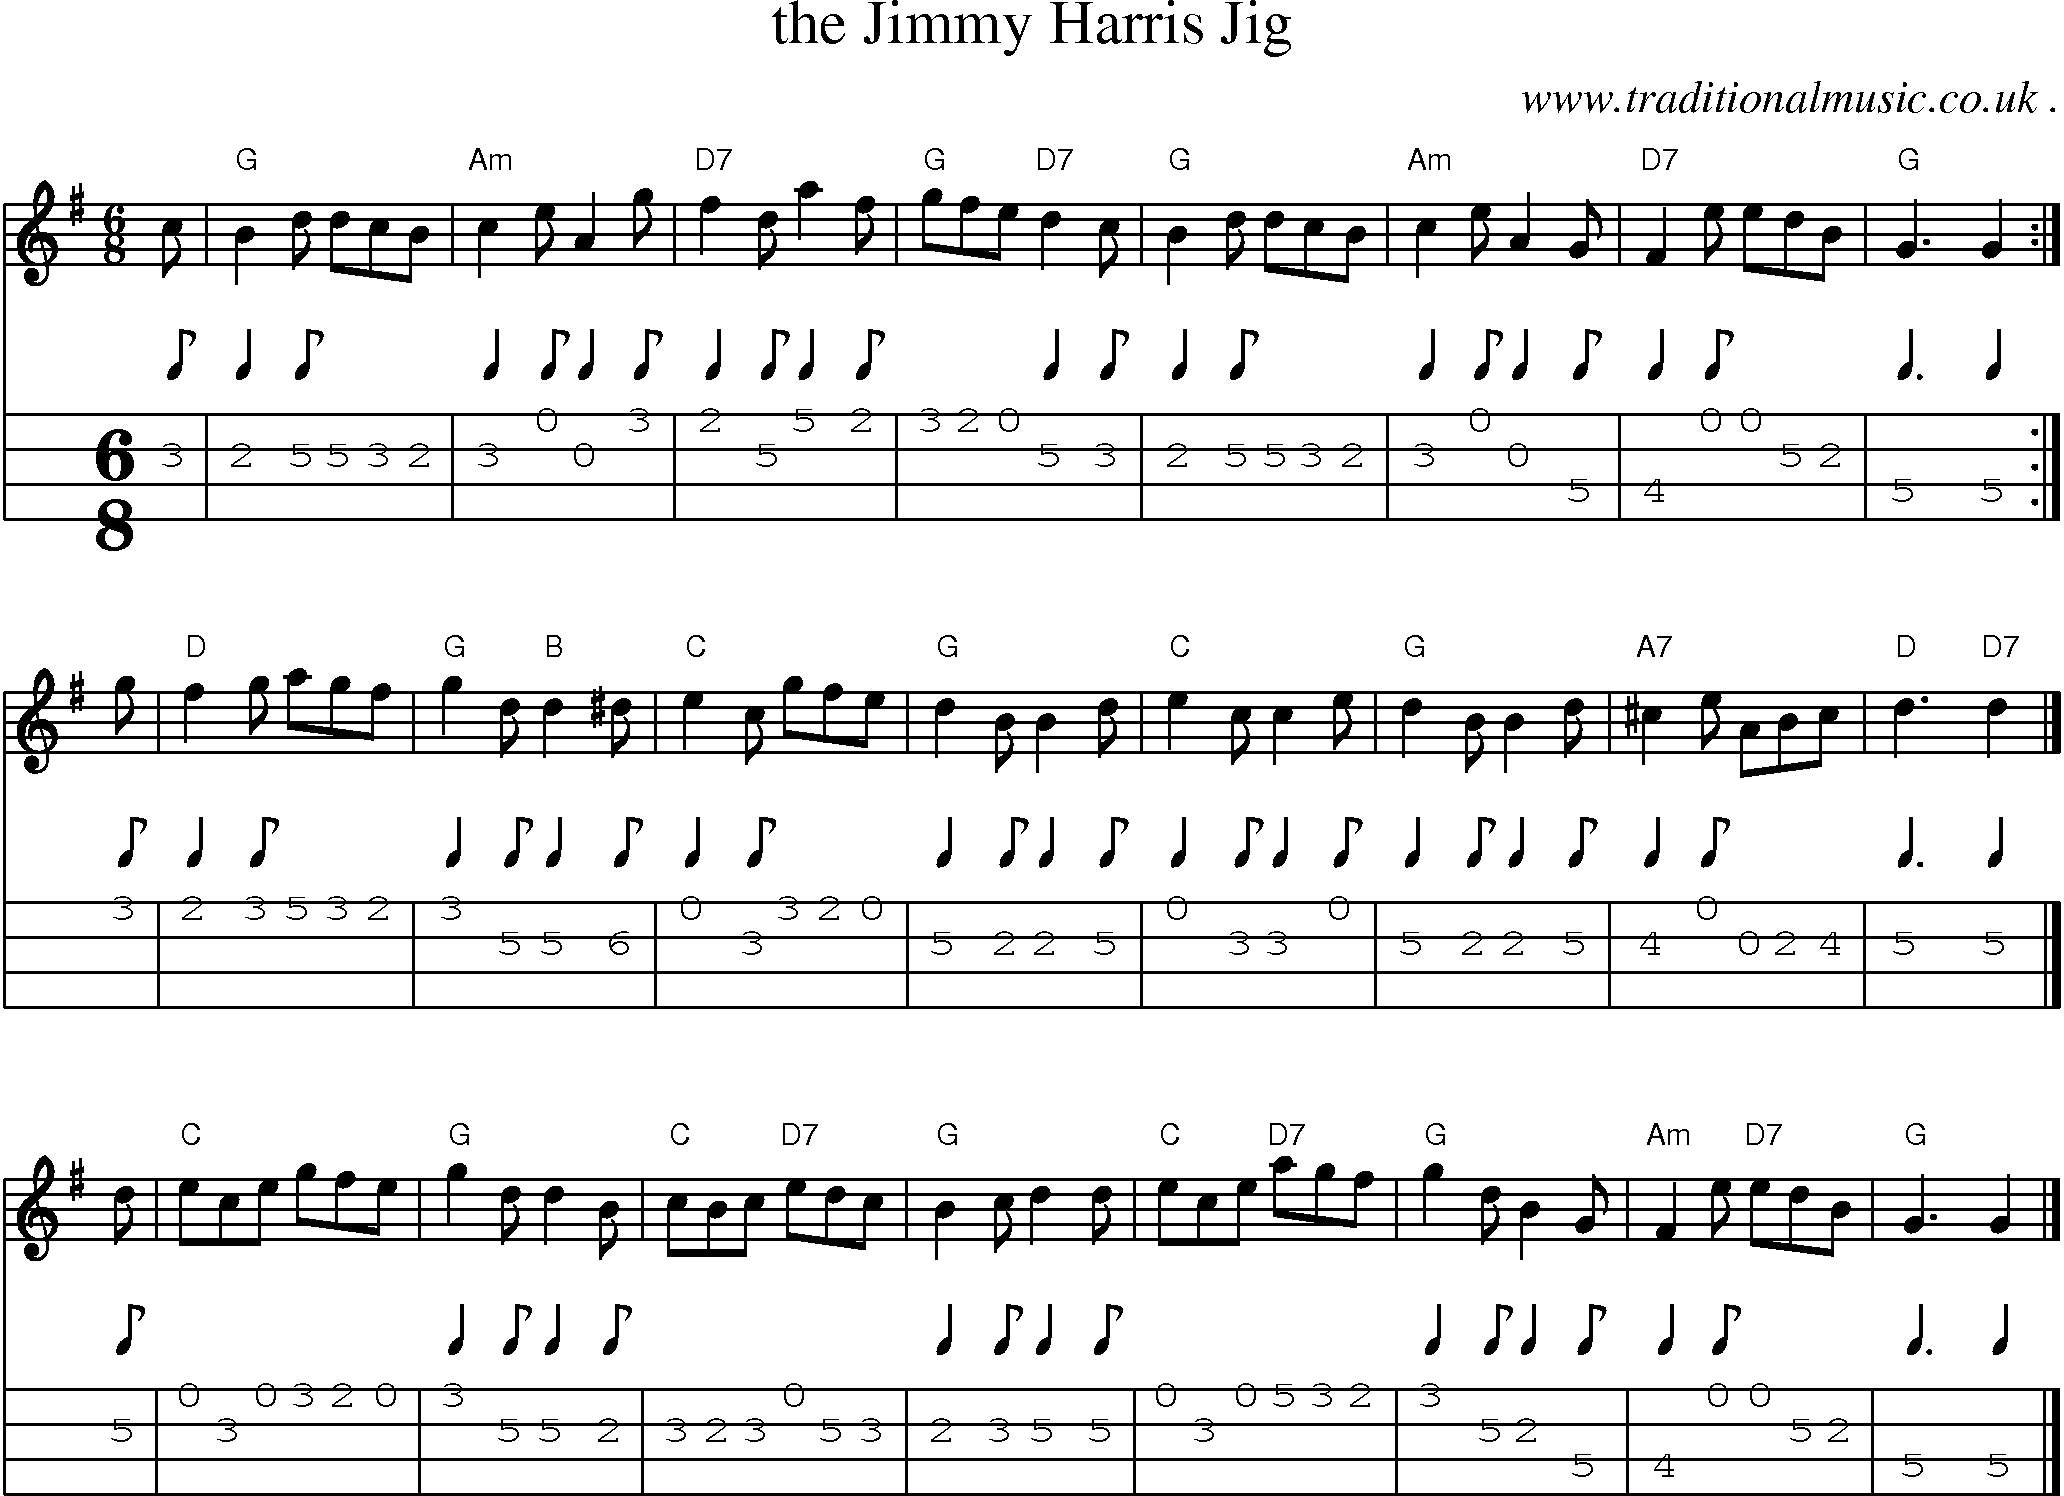 Sheet-music  score, Chords and Mandolin Tabs for The Jimmy Harris Jig